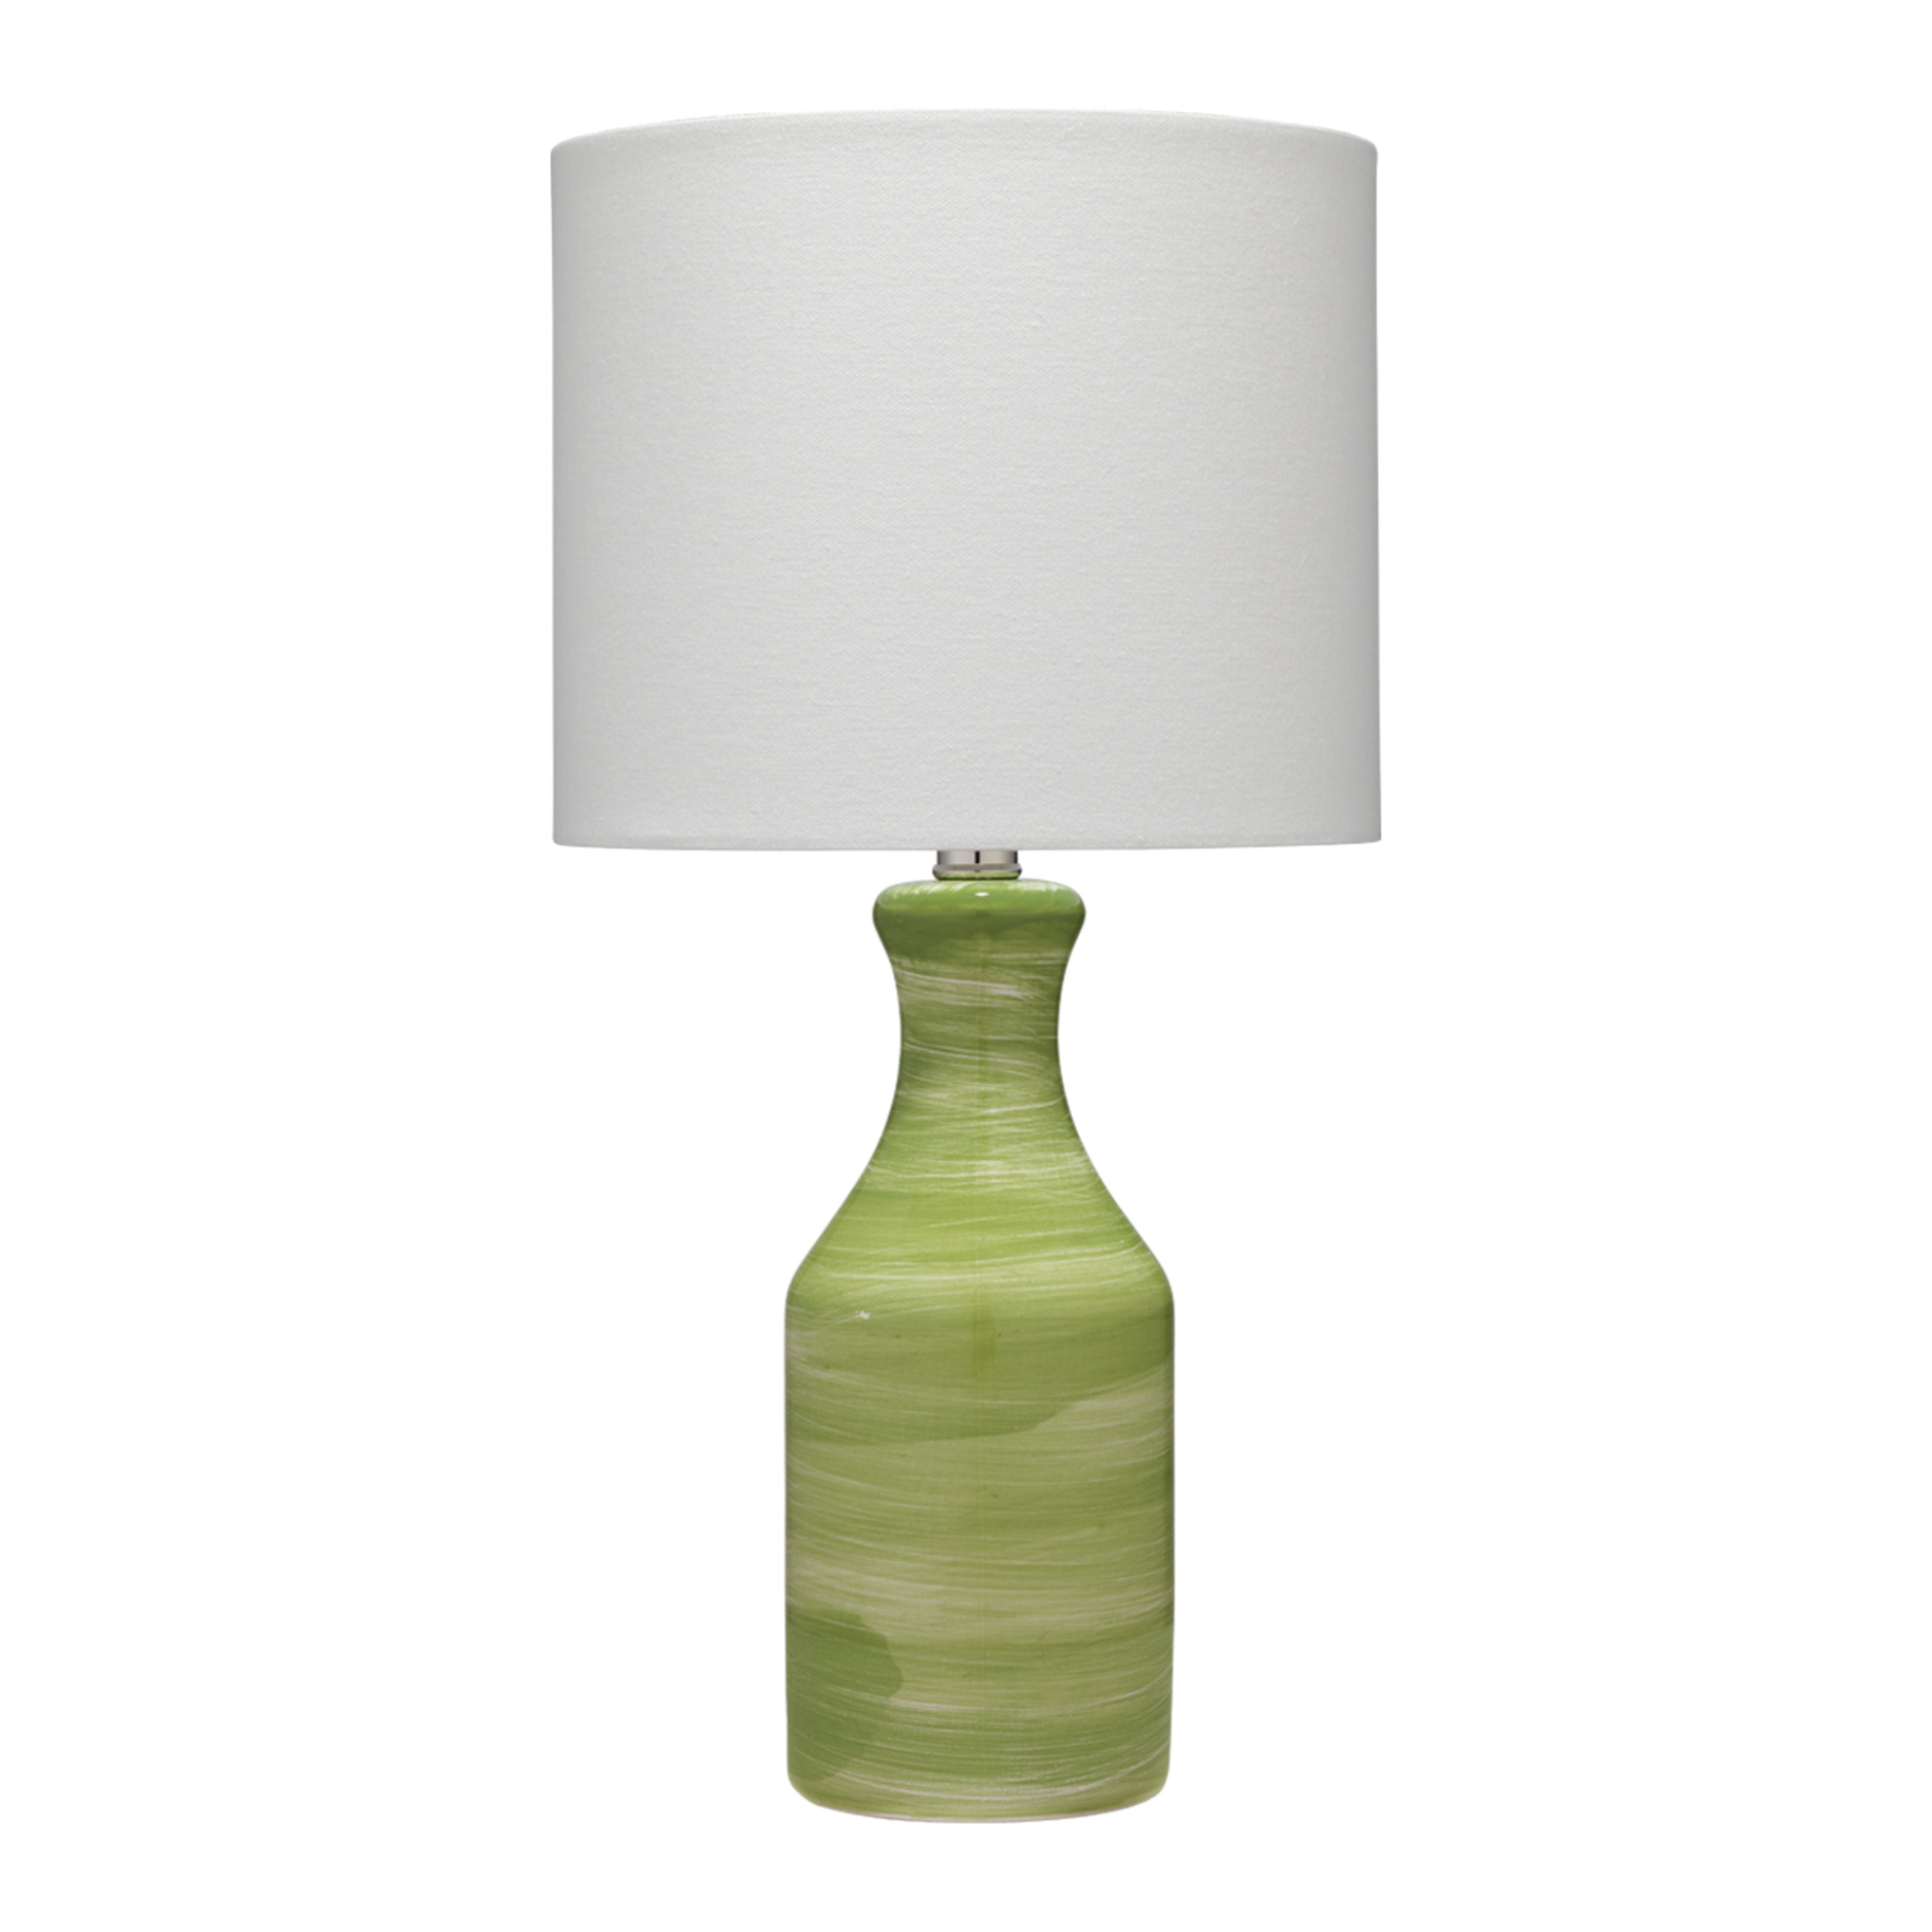 Jamie Young Company - BL716-TL3GR - Bungalow Table Lamp
UNO Socket - Bungalow - Green